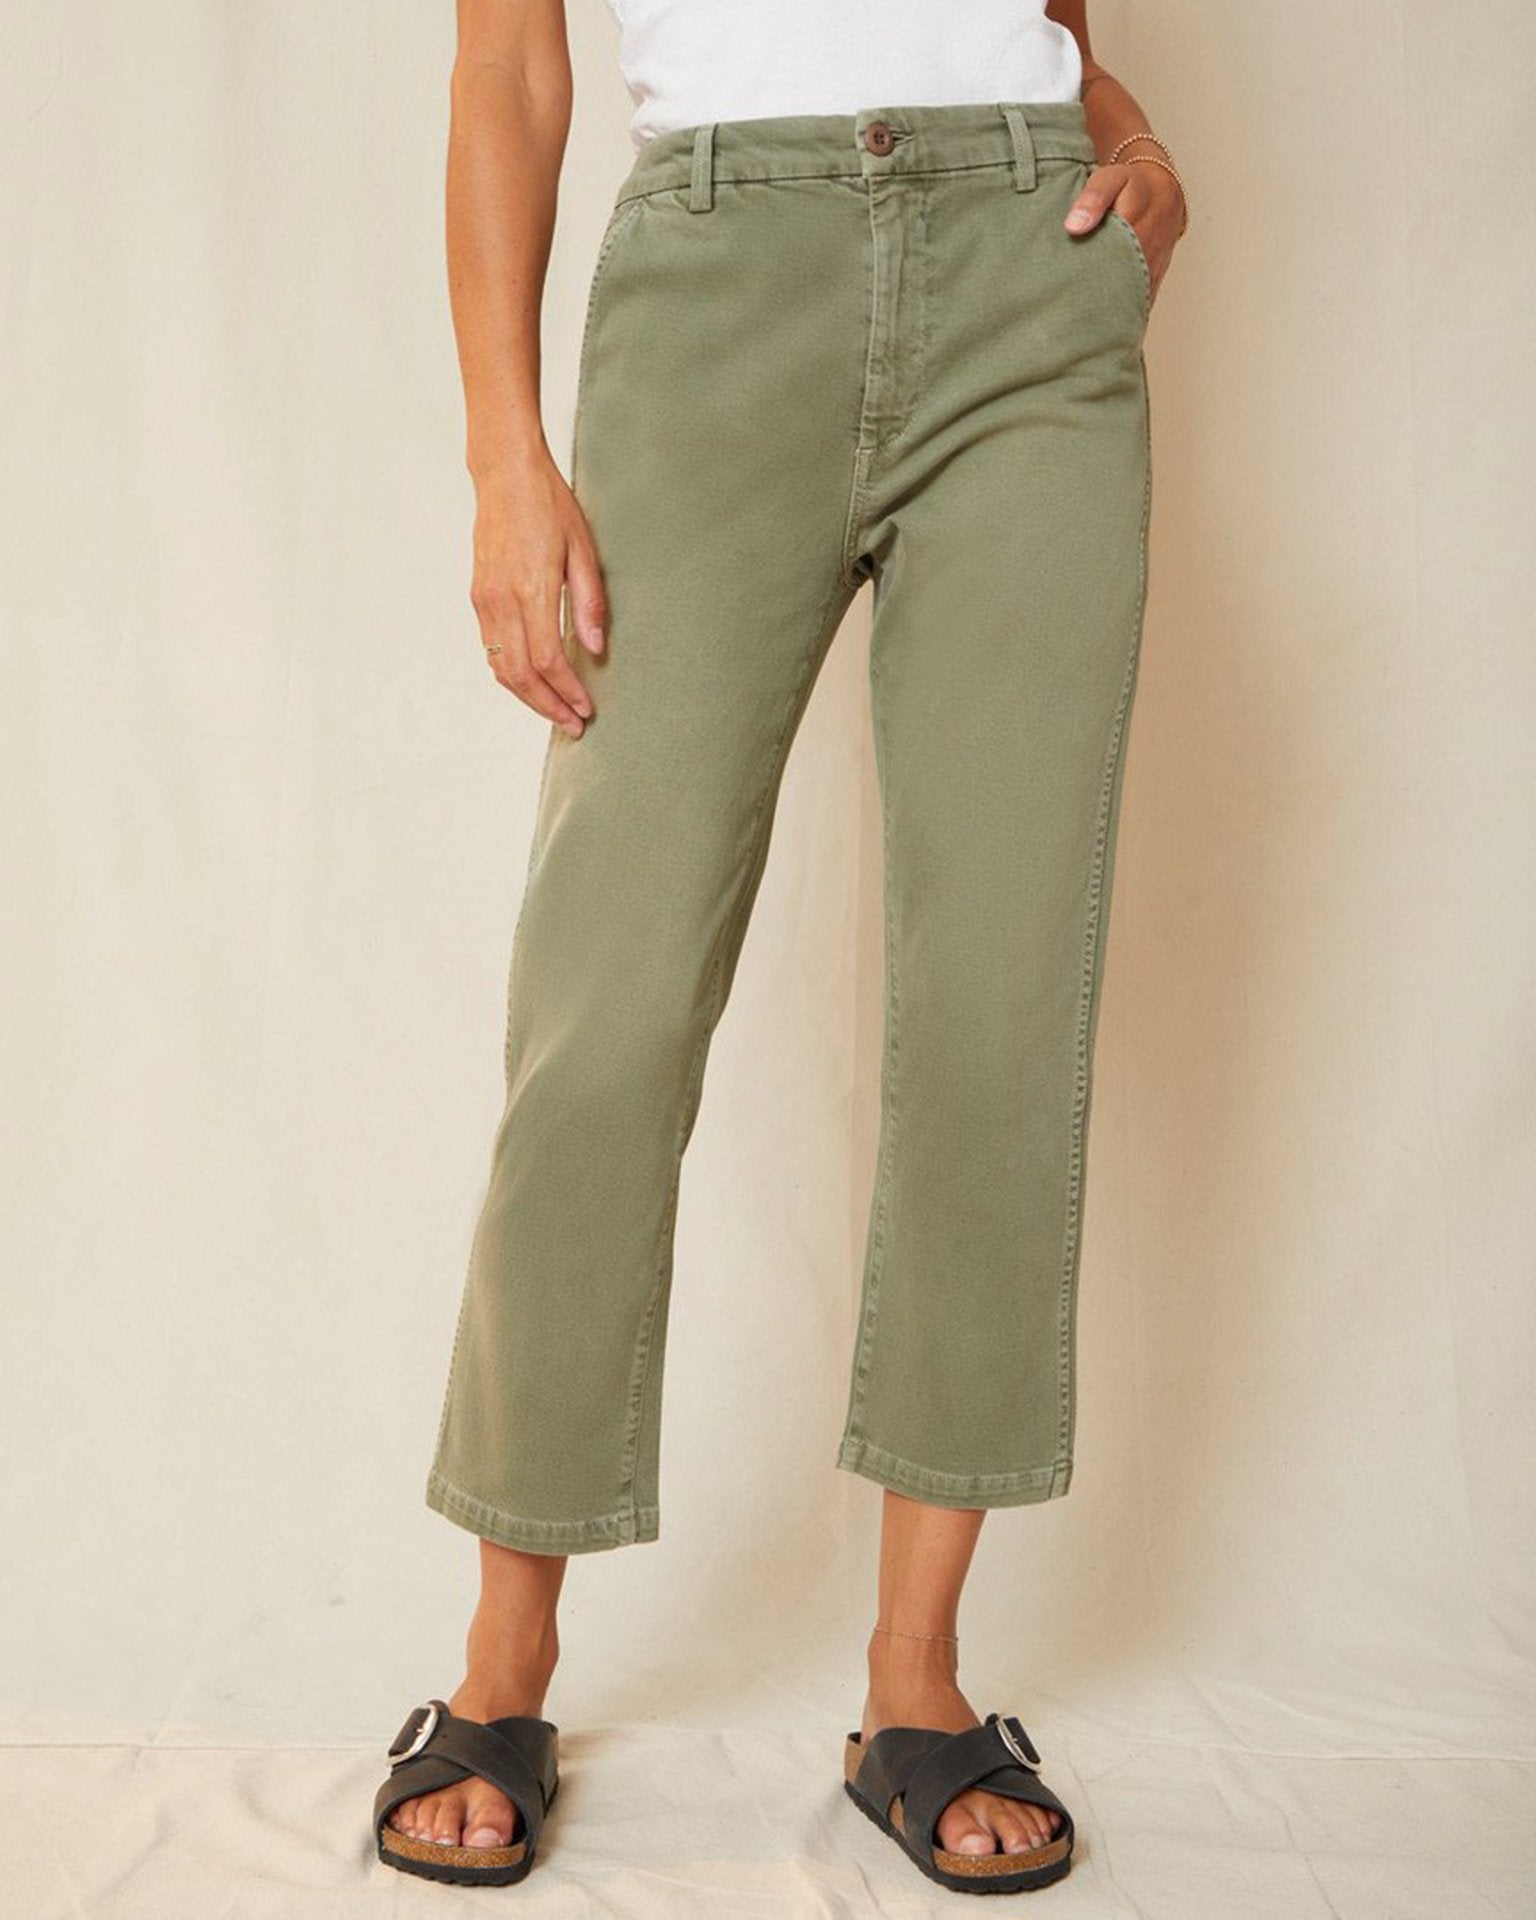 https://www.blissboutiques.com/cdn/shop/products/bliss-bouqitues-amo-easy-trouser-relaxed-crop-straight-in-surplus-28684360450145.jpg?v=1634346436